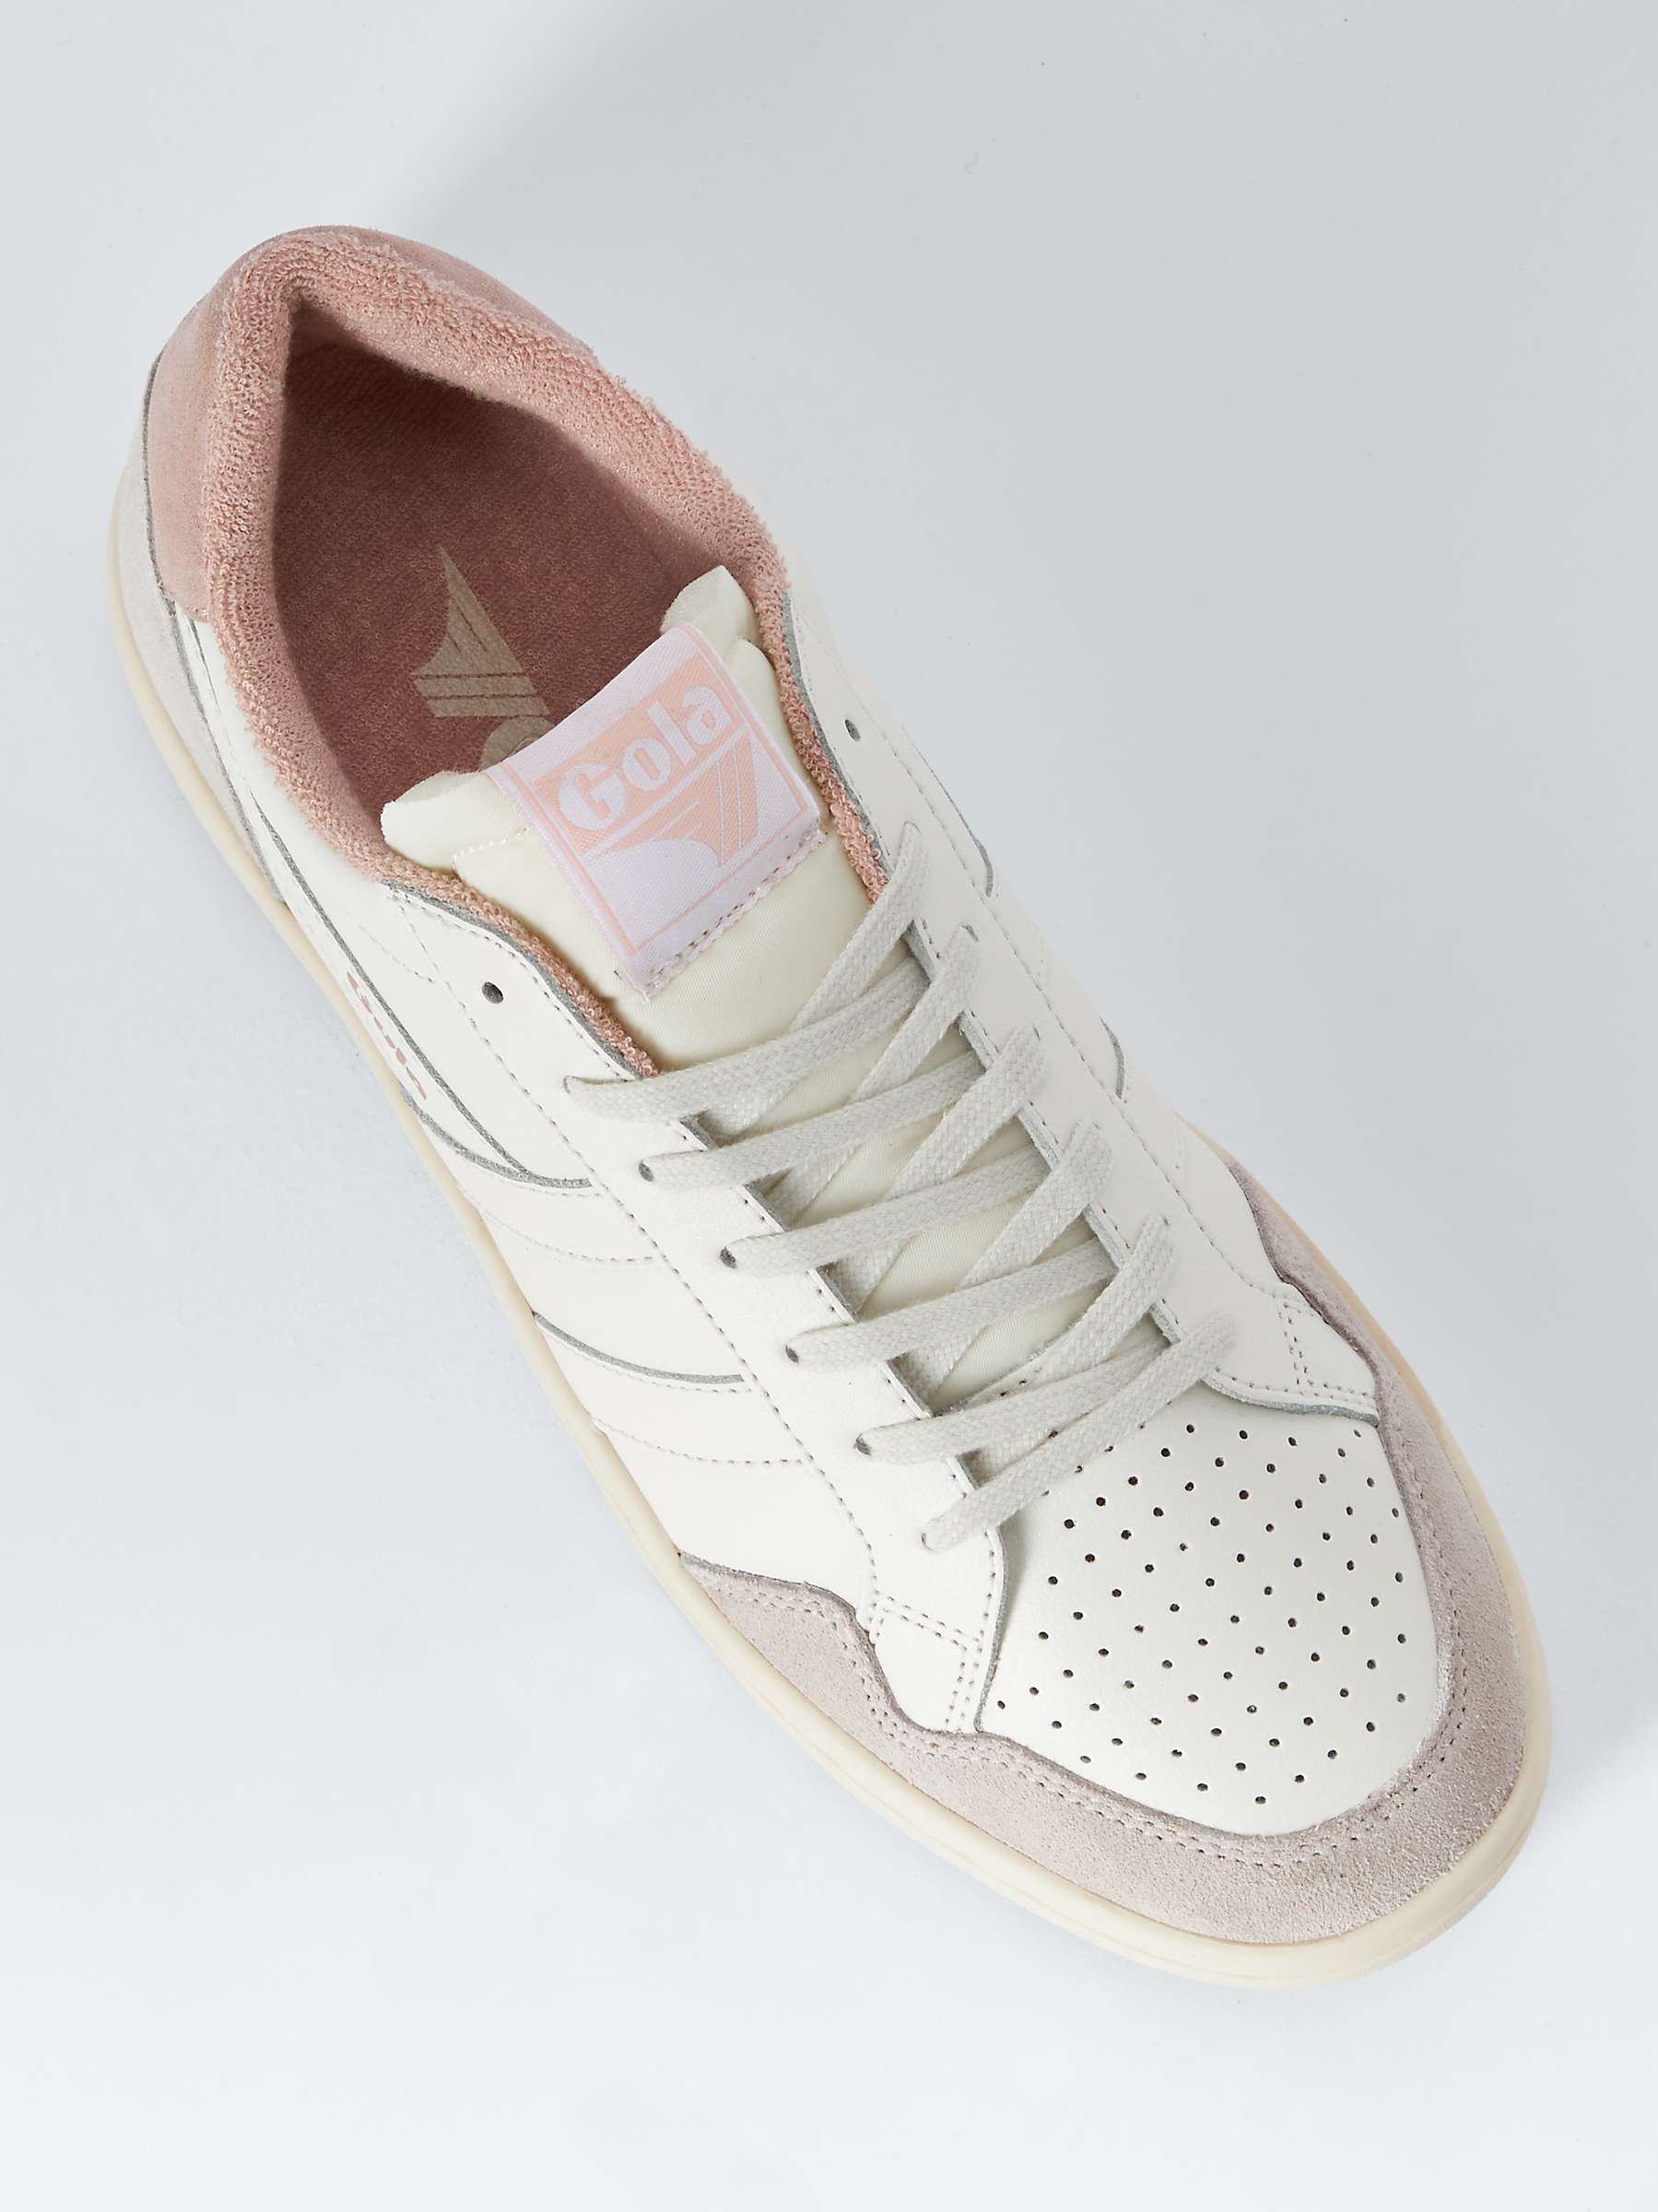 Buy Gola Eagle Leather Lace Up Trainers Online at johnlewis.com